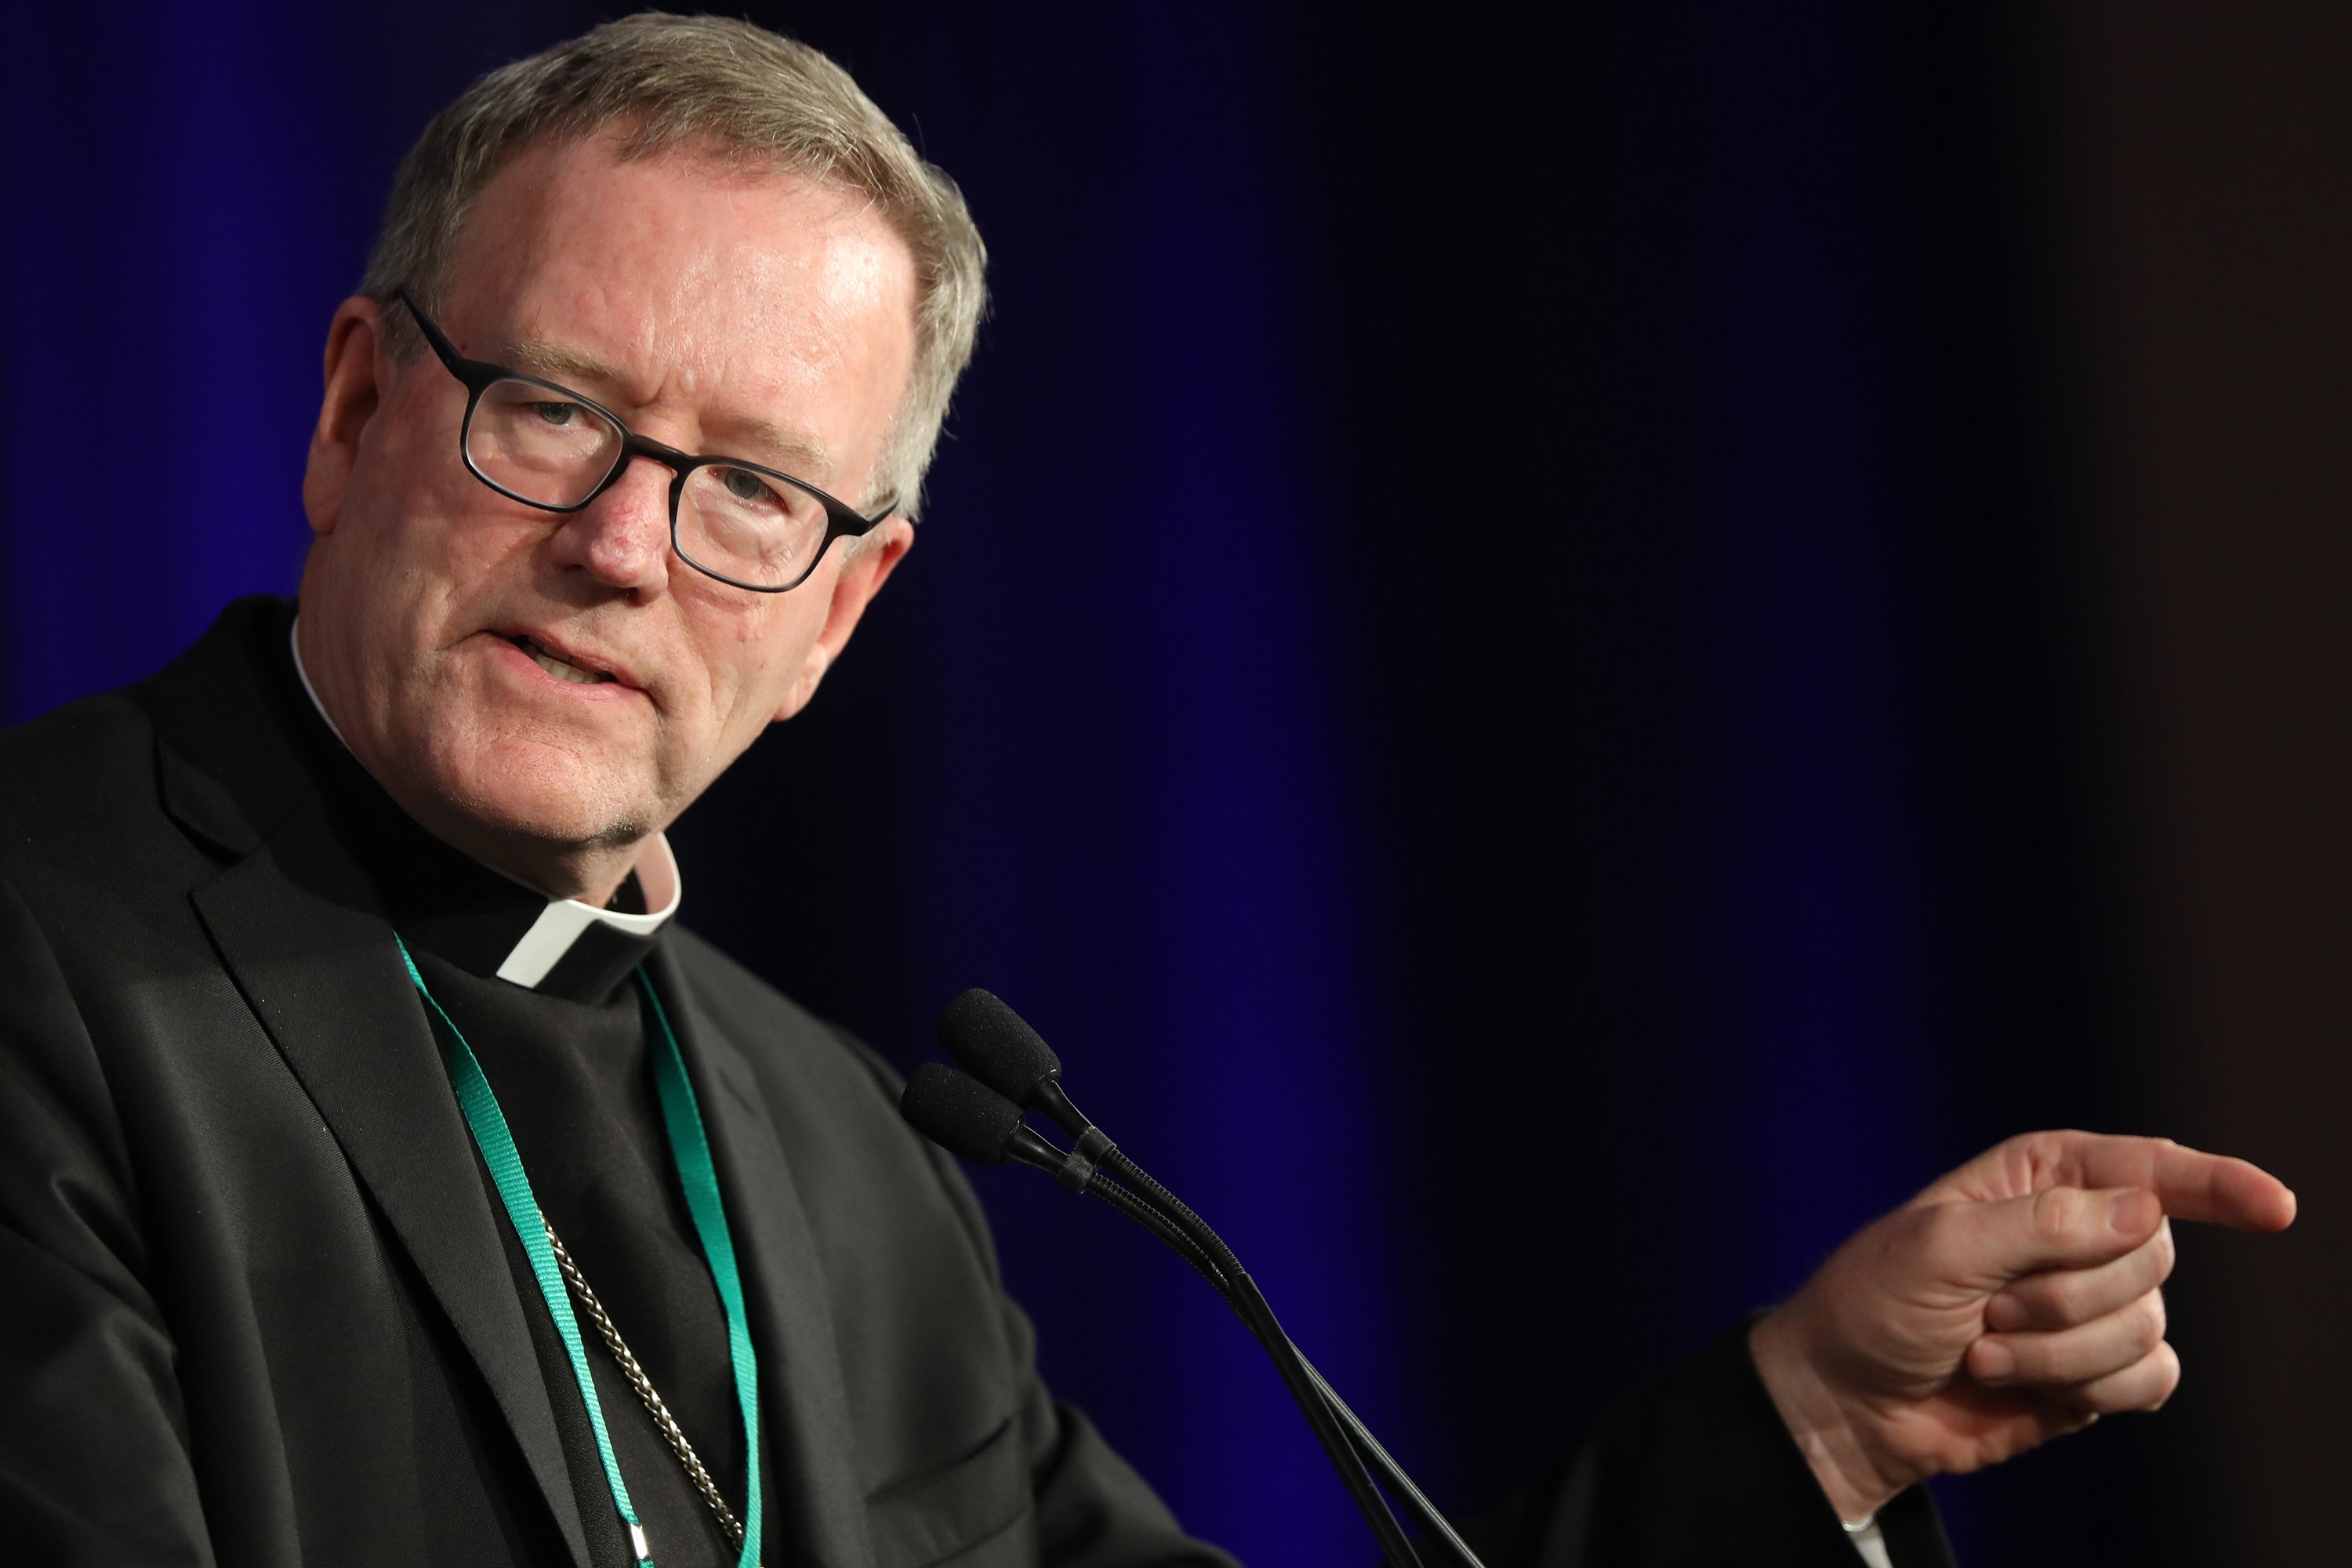 Los Angeles Auxiliary Bishop Robert Barron speaks June 11, 2019, on the first day of the spring general assembly of the U.S. Conference of Catholic Bishops in Baltimore. (CNS/Bob Roller)